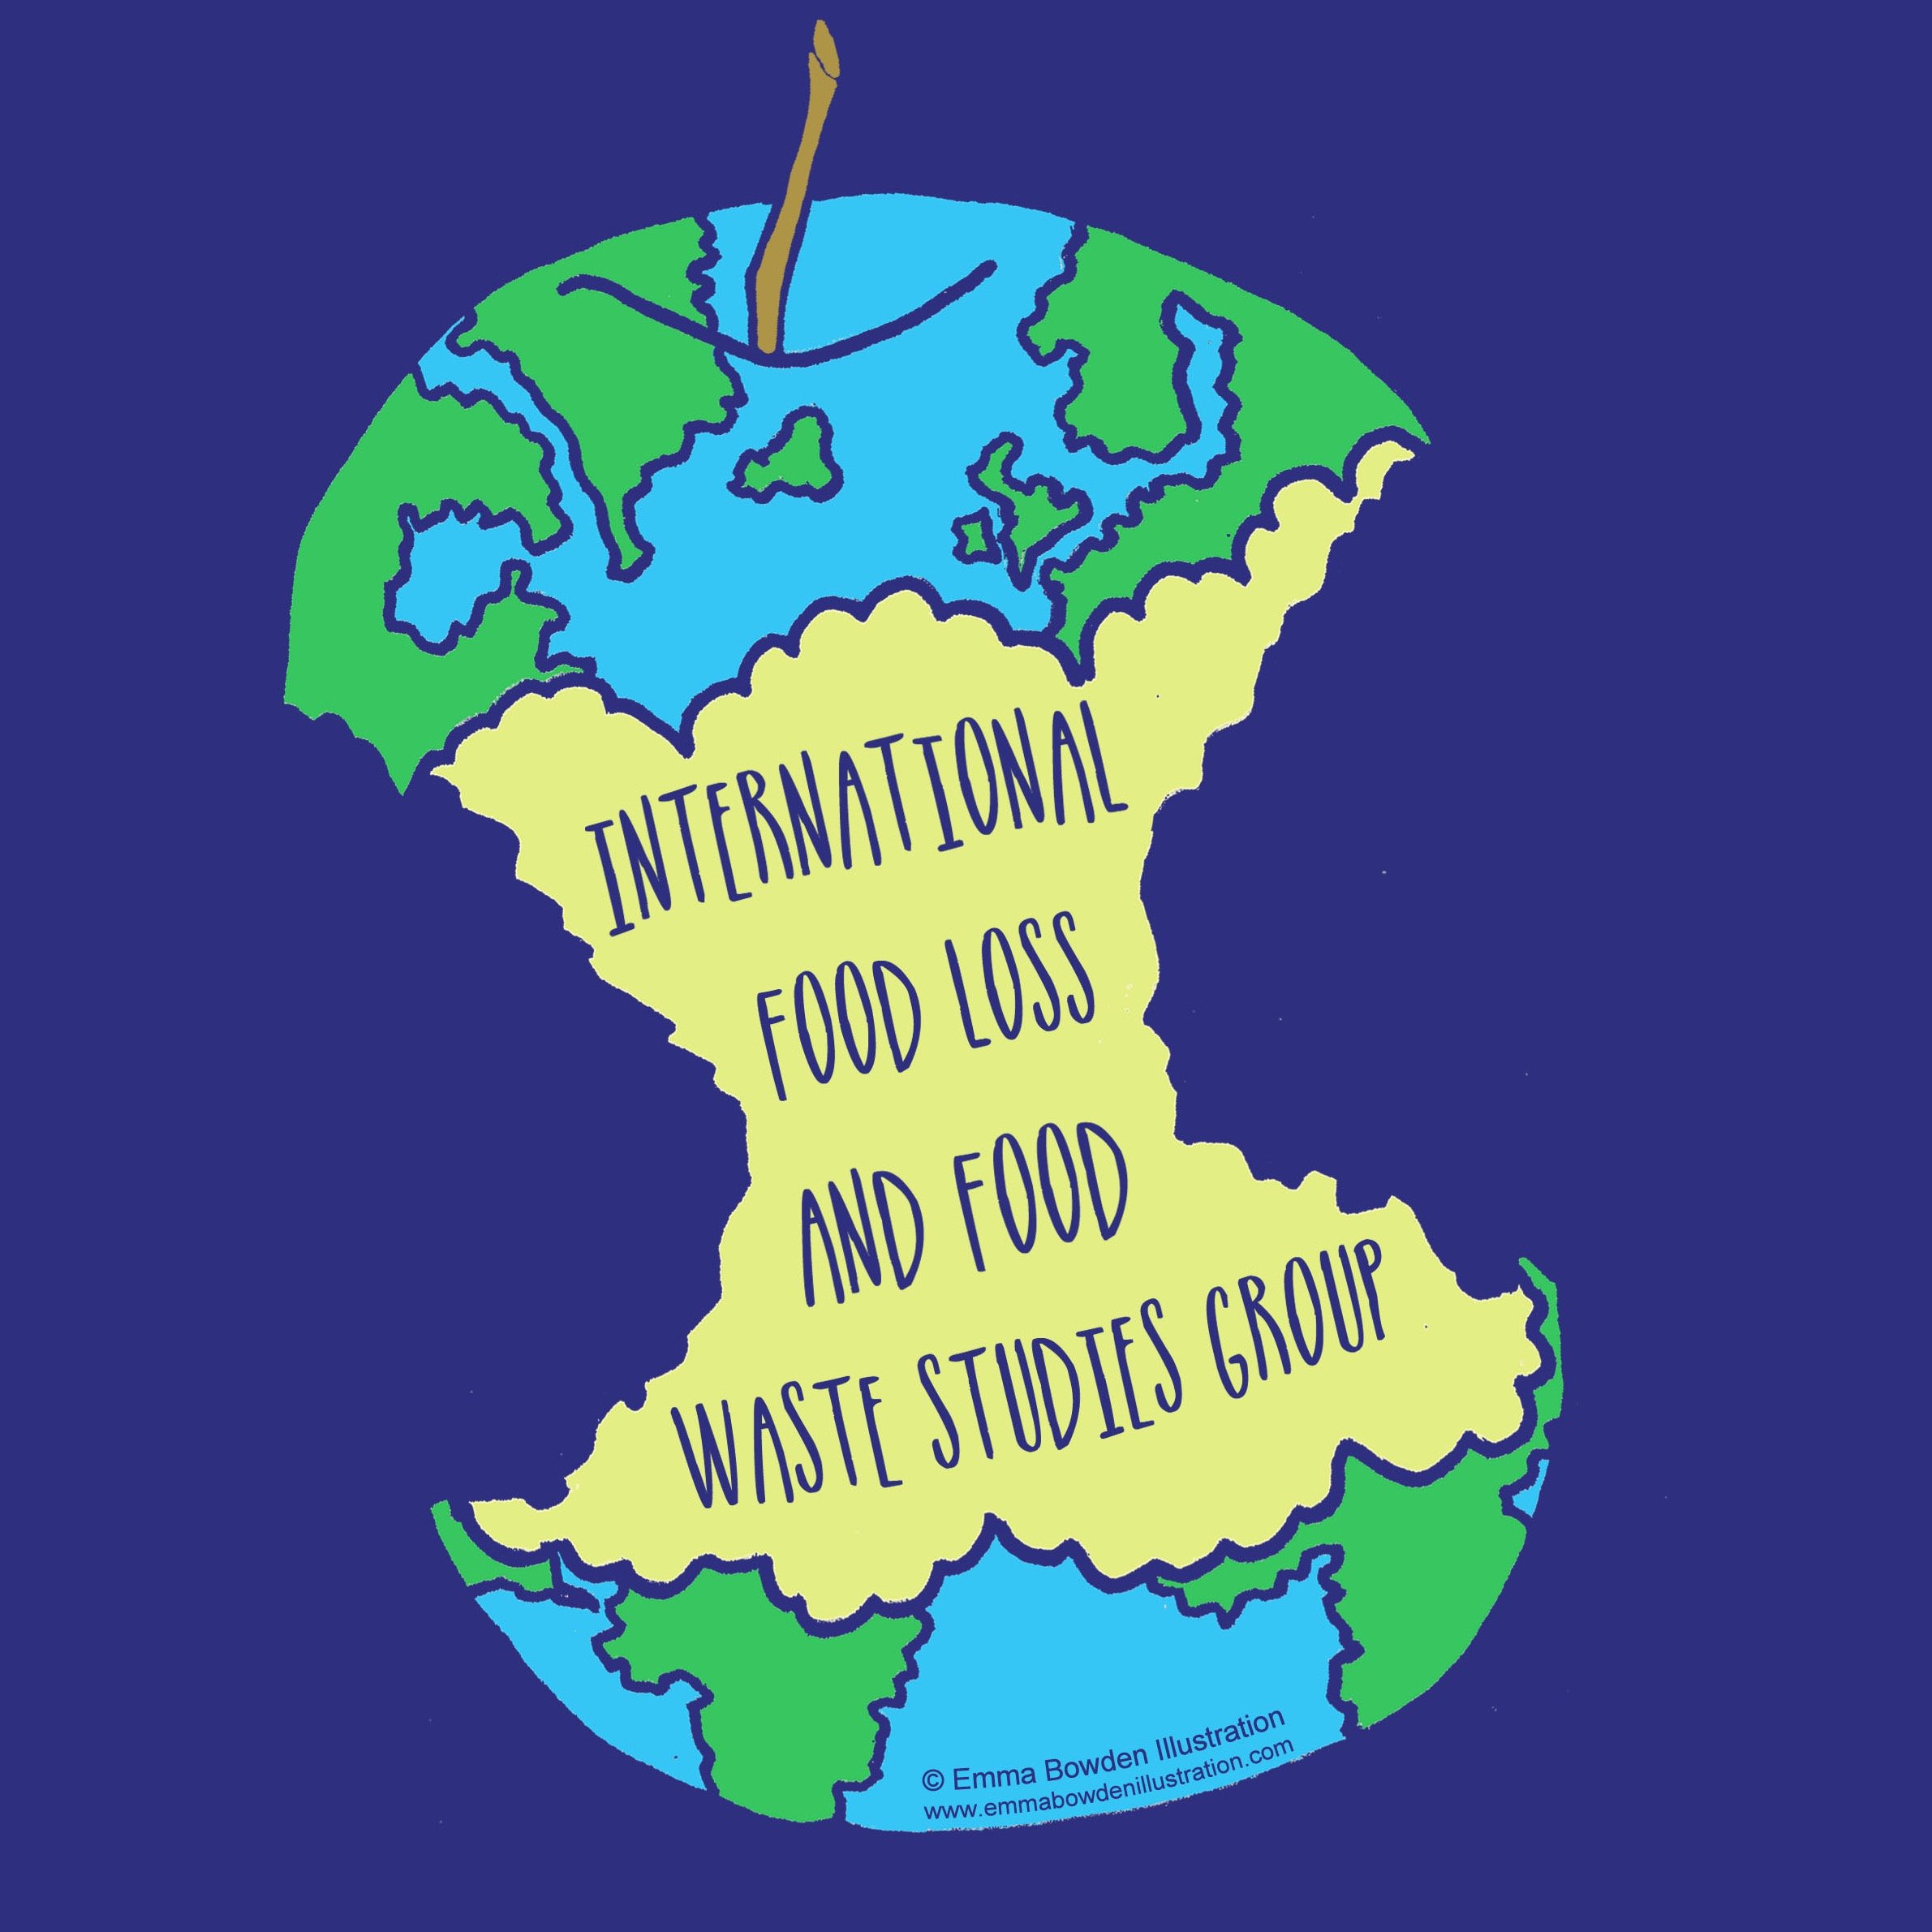 Connecting researchers and practitioners globally in the field of food loss and food waste -International Food Loss and Food Waste Studies Group Run by @jlazell